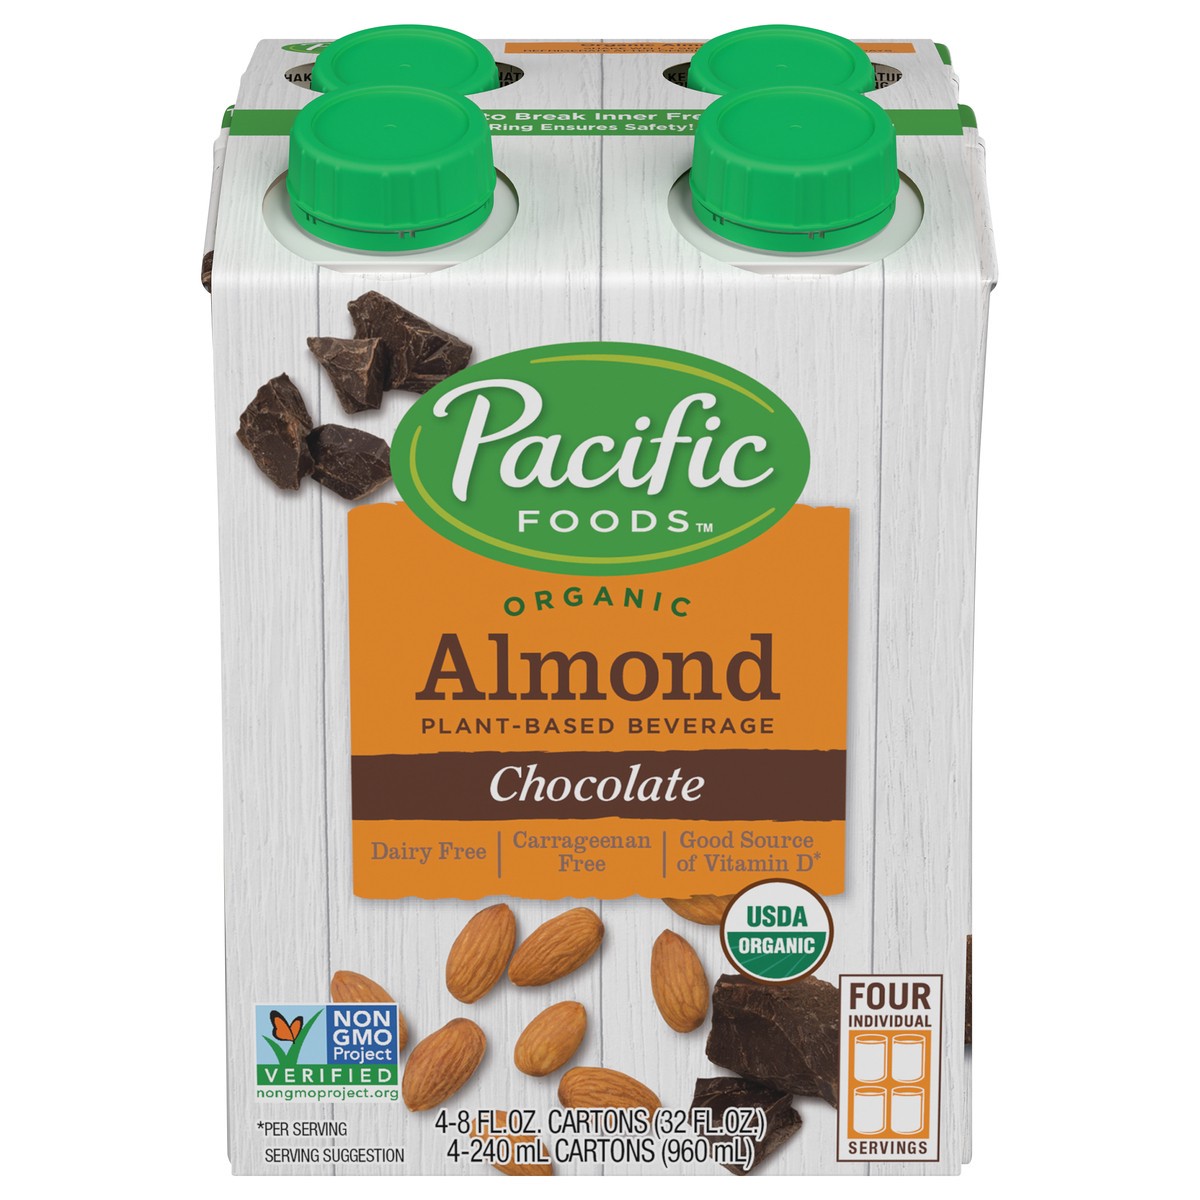 slide 1 of 12, Pacific Foods Organic Almond Chocolate Plant-Based Beverage, 8oz, 4-pack, 32 oz